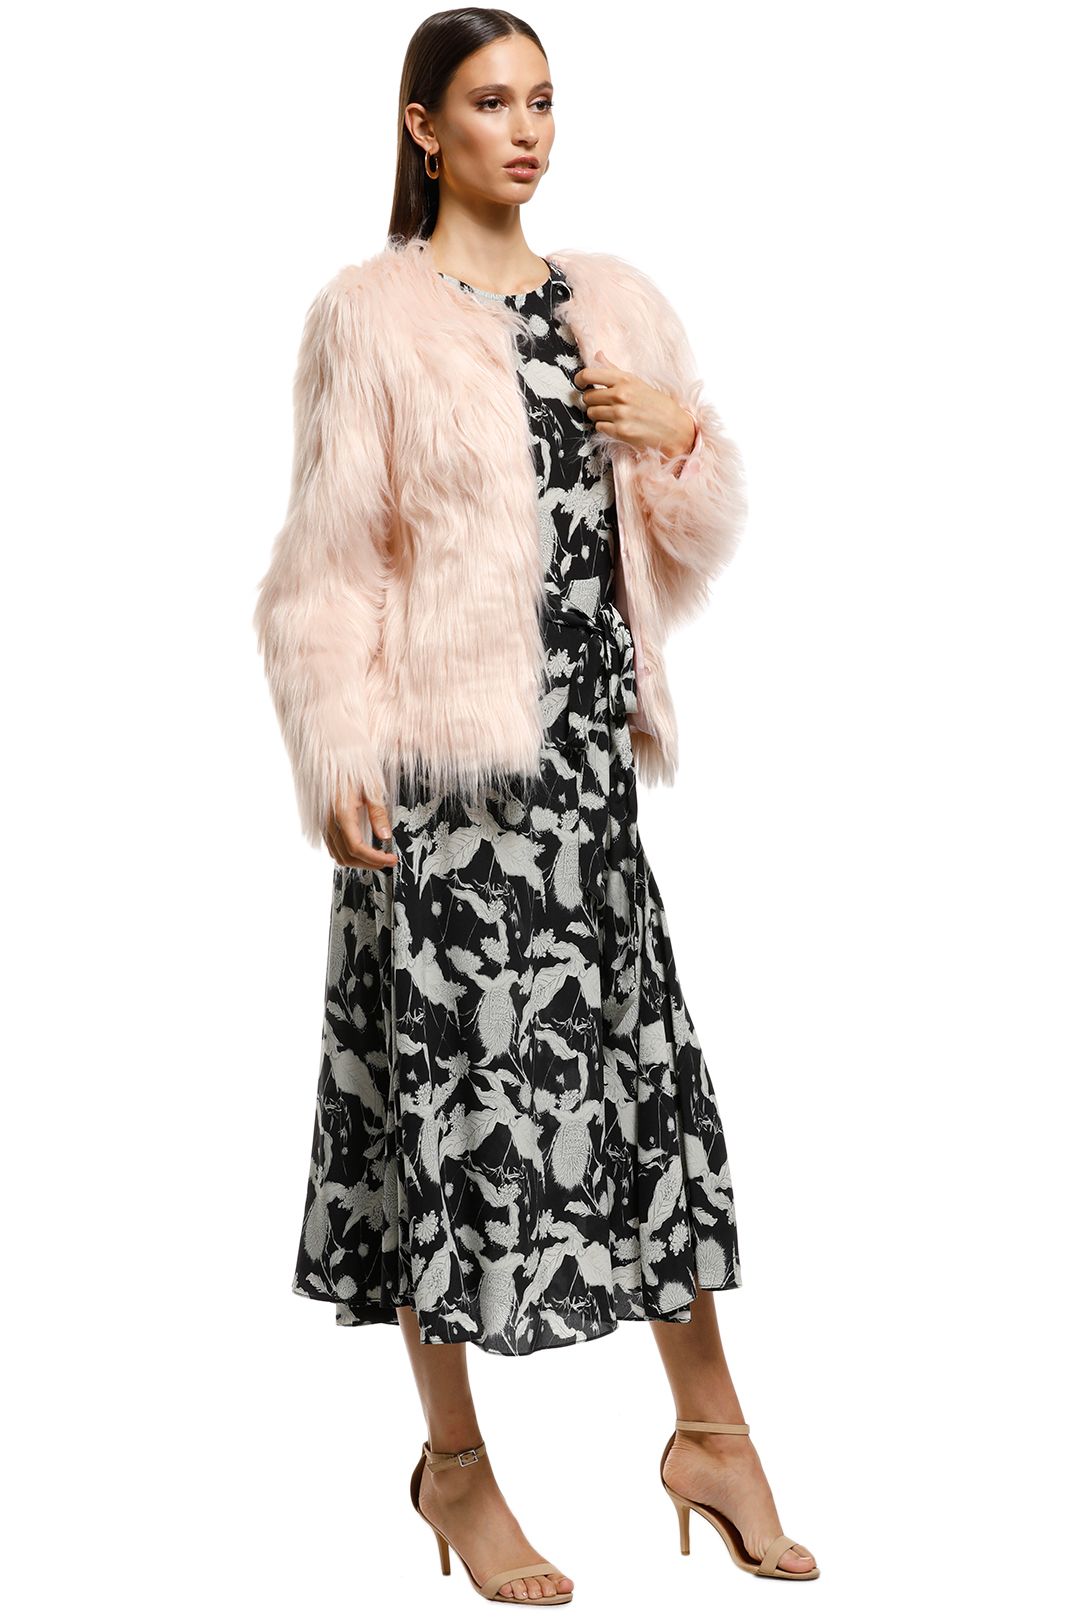 Everly - Marmont Faux Fur Jacket - Soft Pink - Side